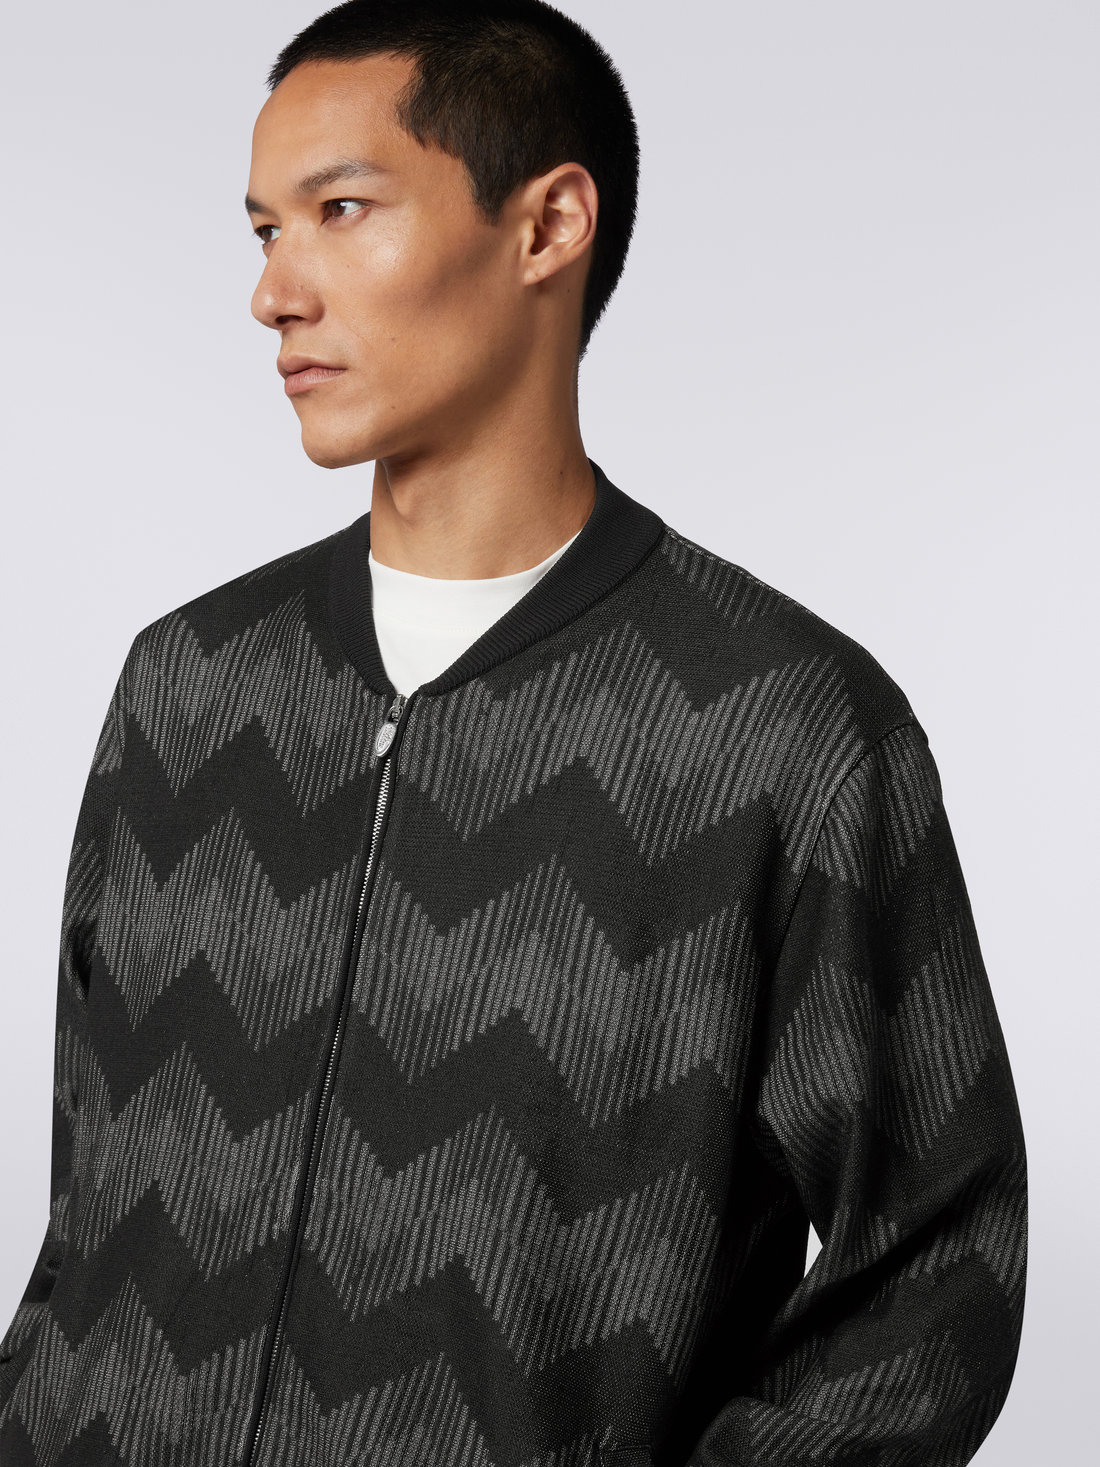 Cotton blend zigzag bomber jacket in collaboration with Mike Maignan, Black & White - TS23SC04BK031NS91IB - 4